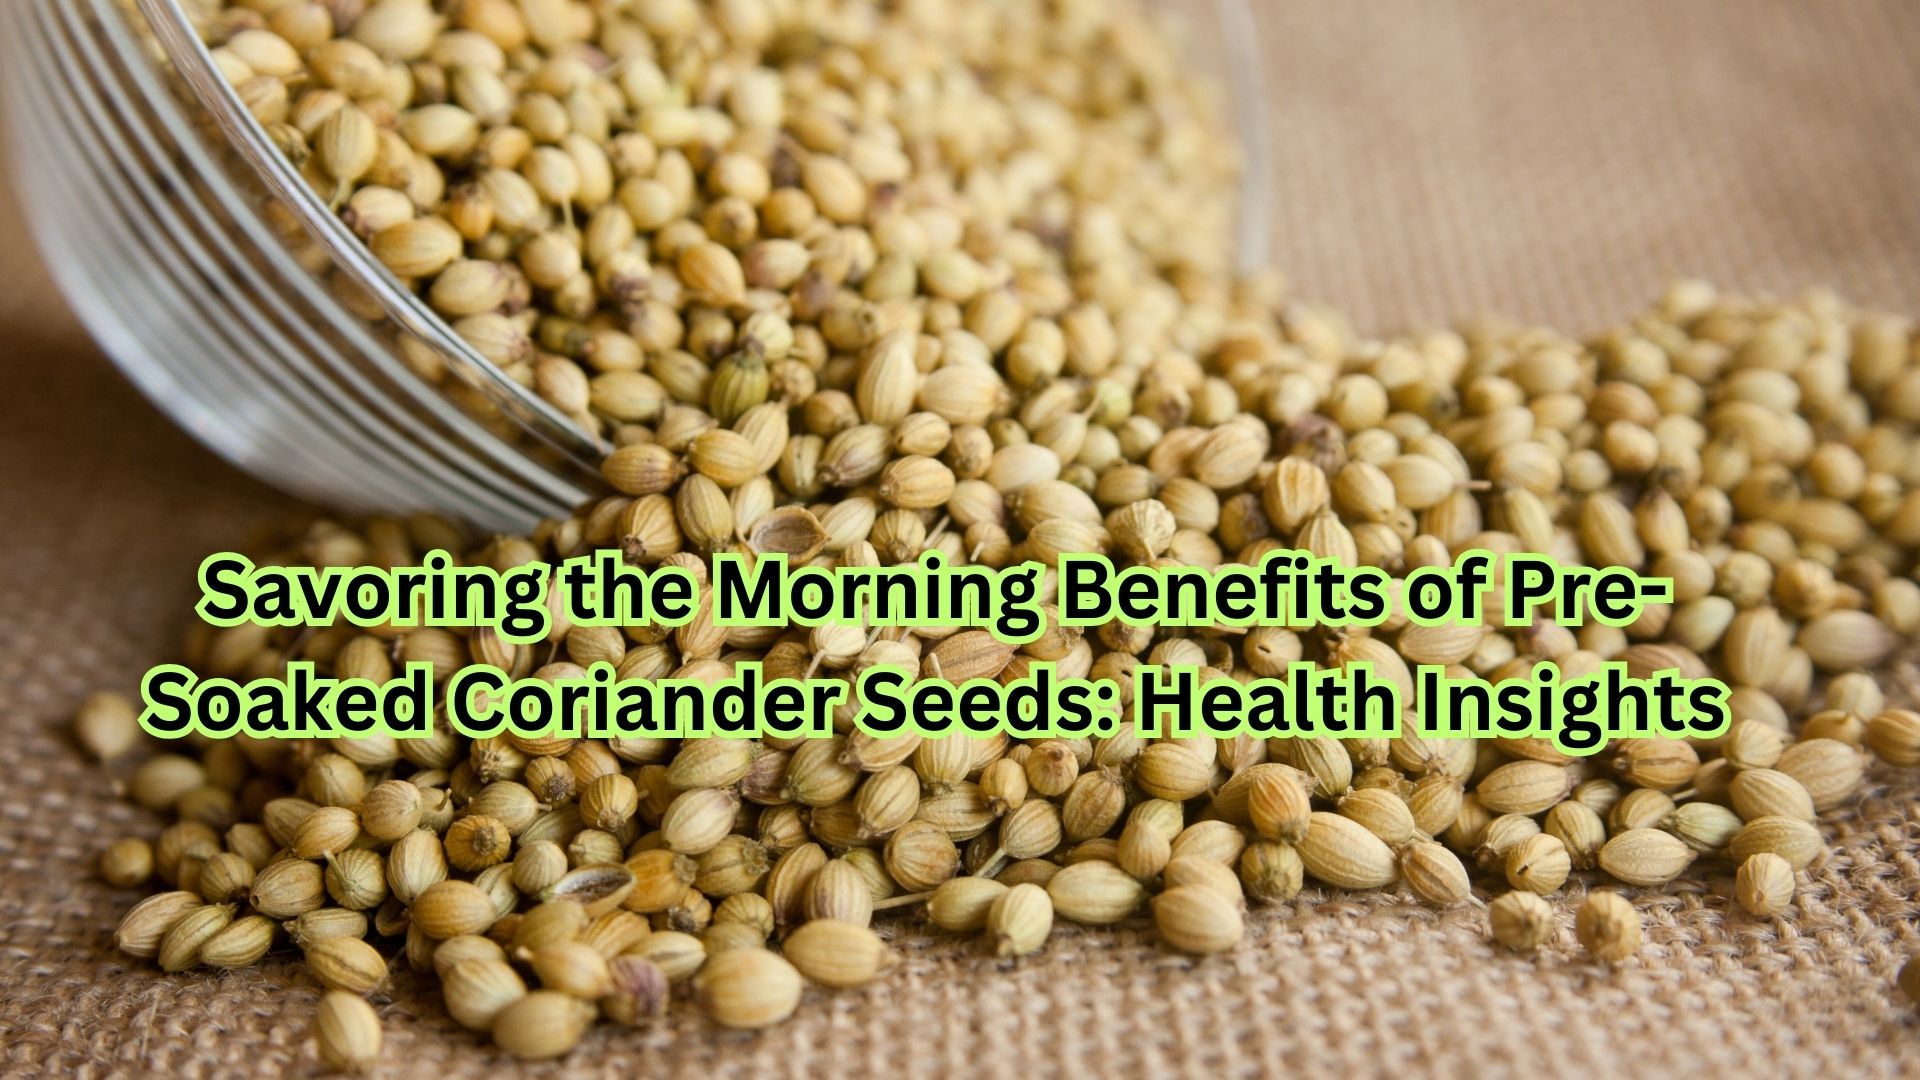 Savoring the Morning Benefits of Pre-Soaked Coriander Seeds: Health Insights